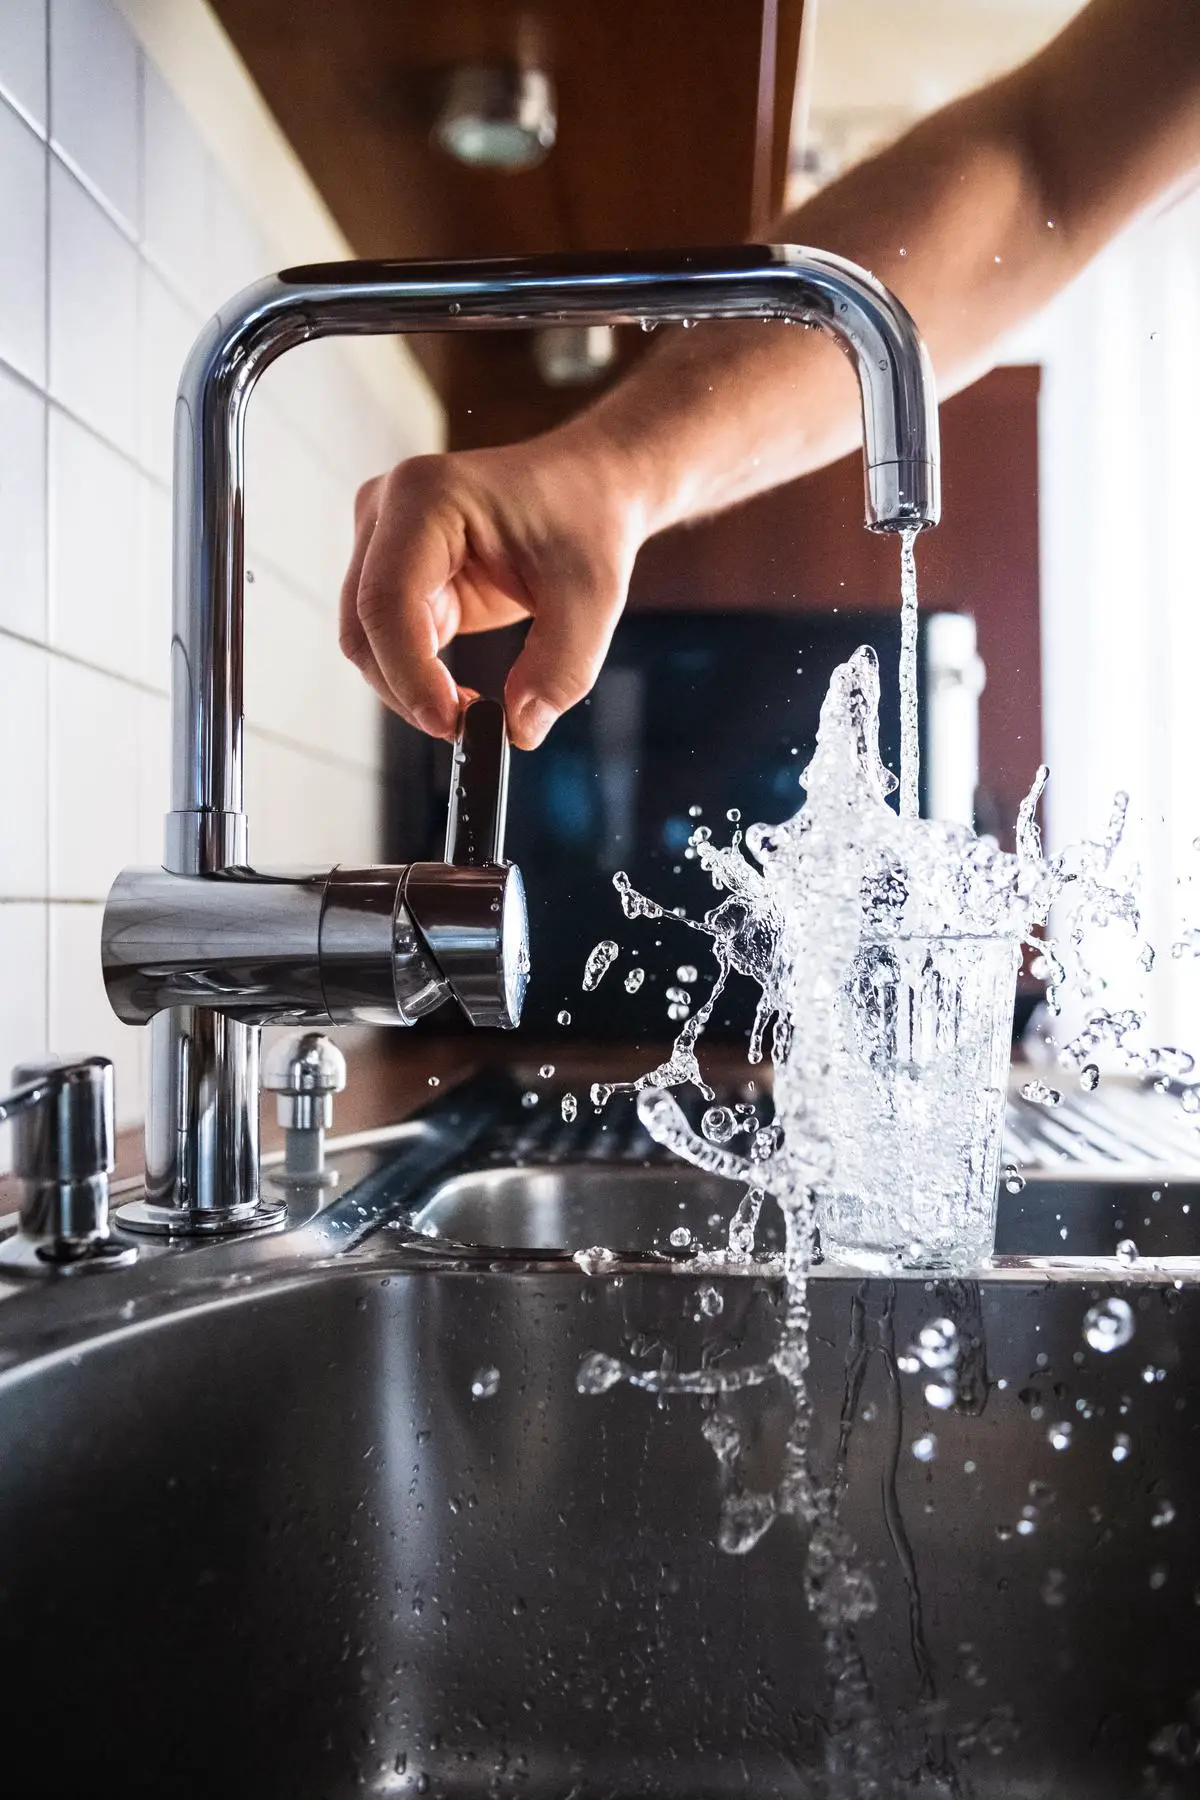 Image of a person holding a wrench and fixing a leaky faucet.